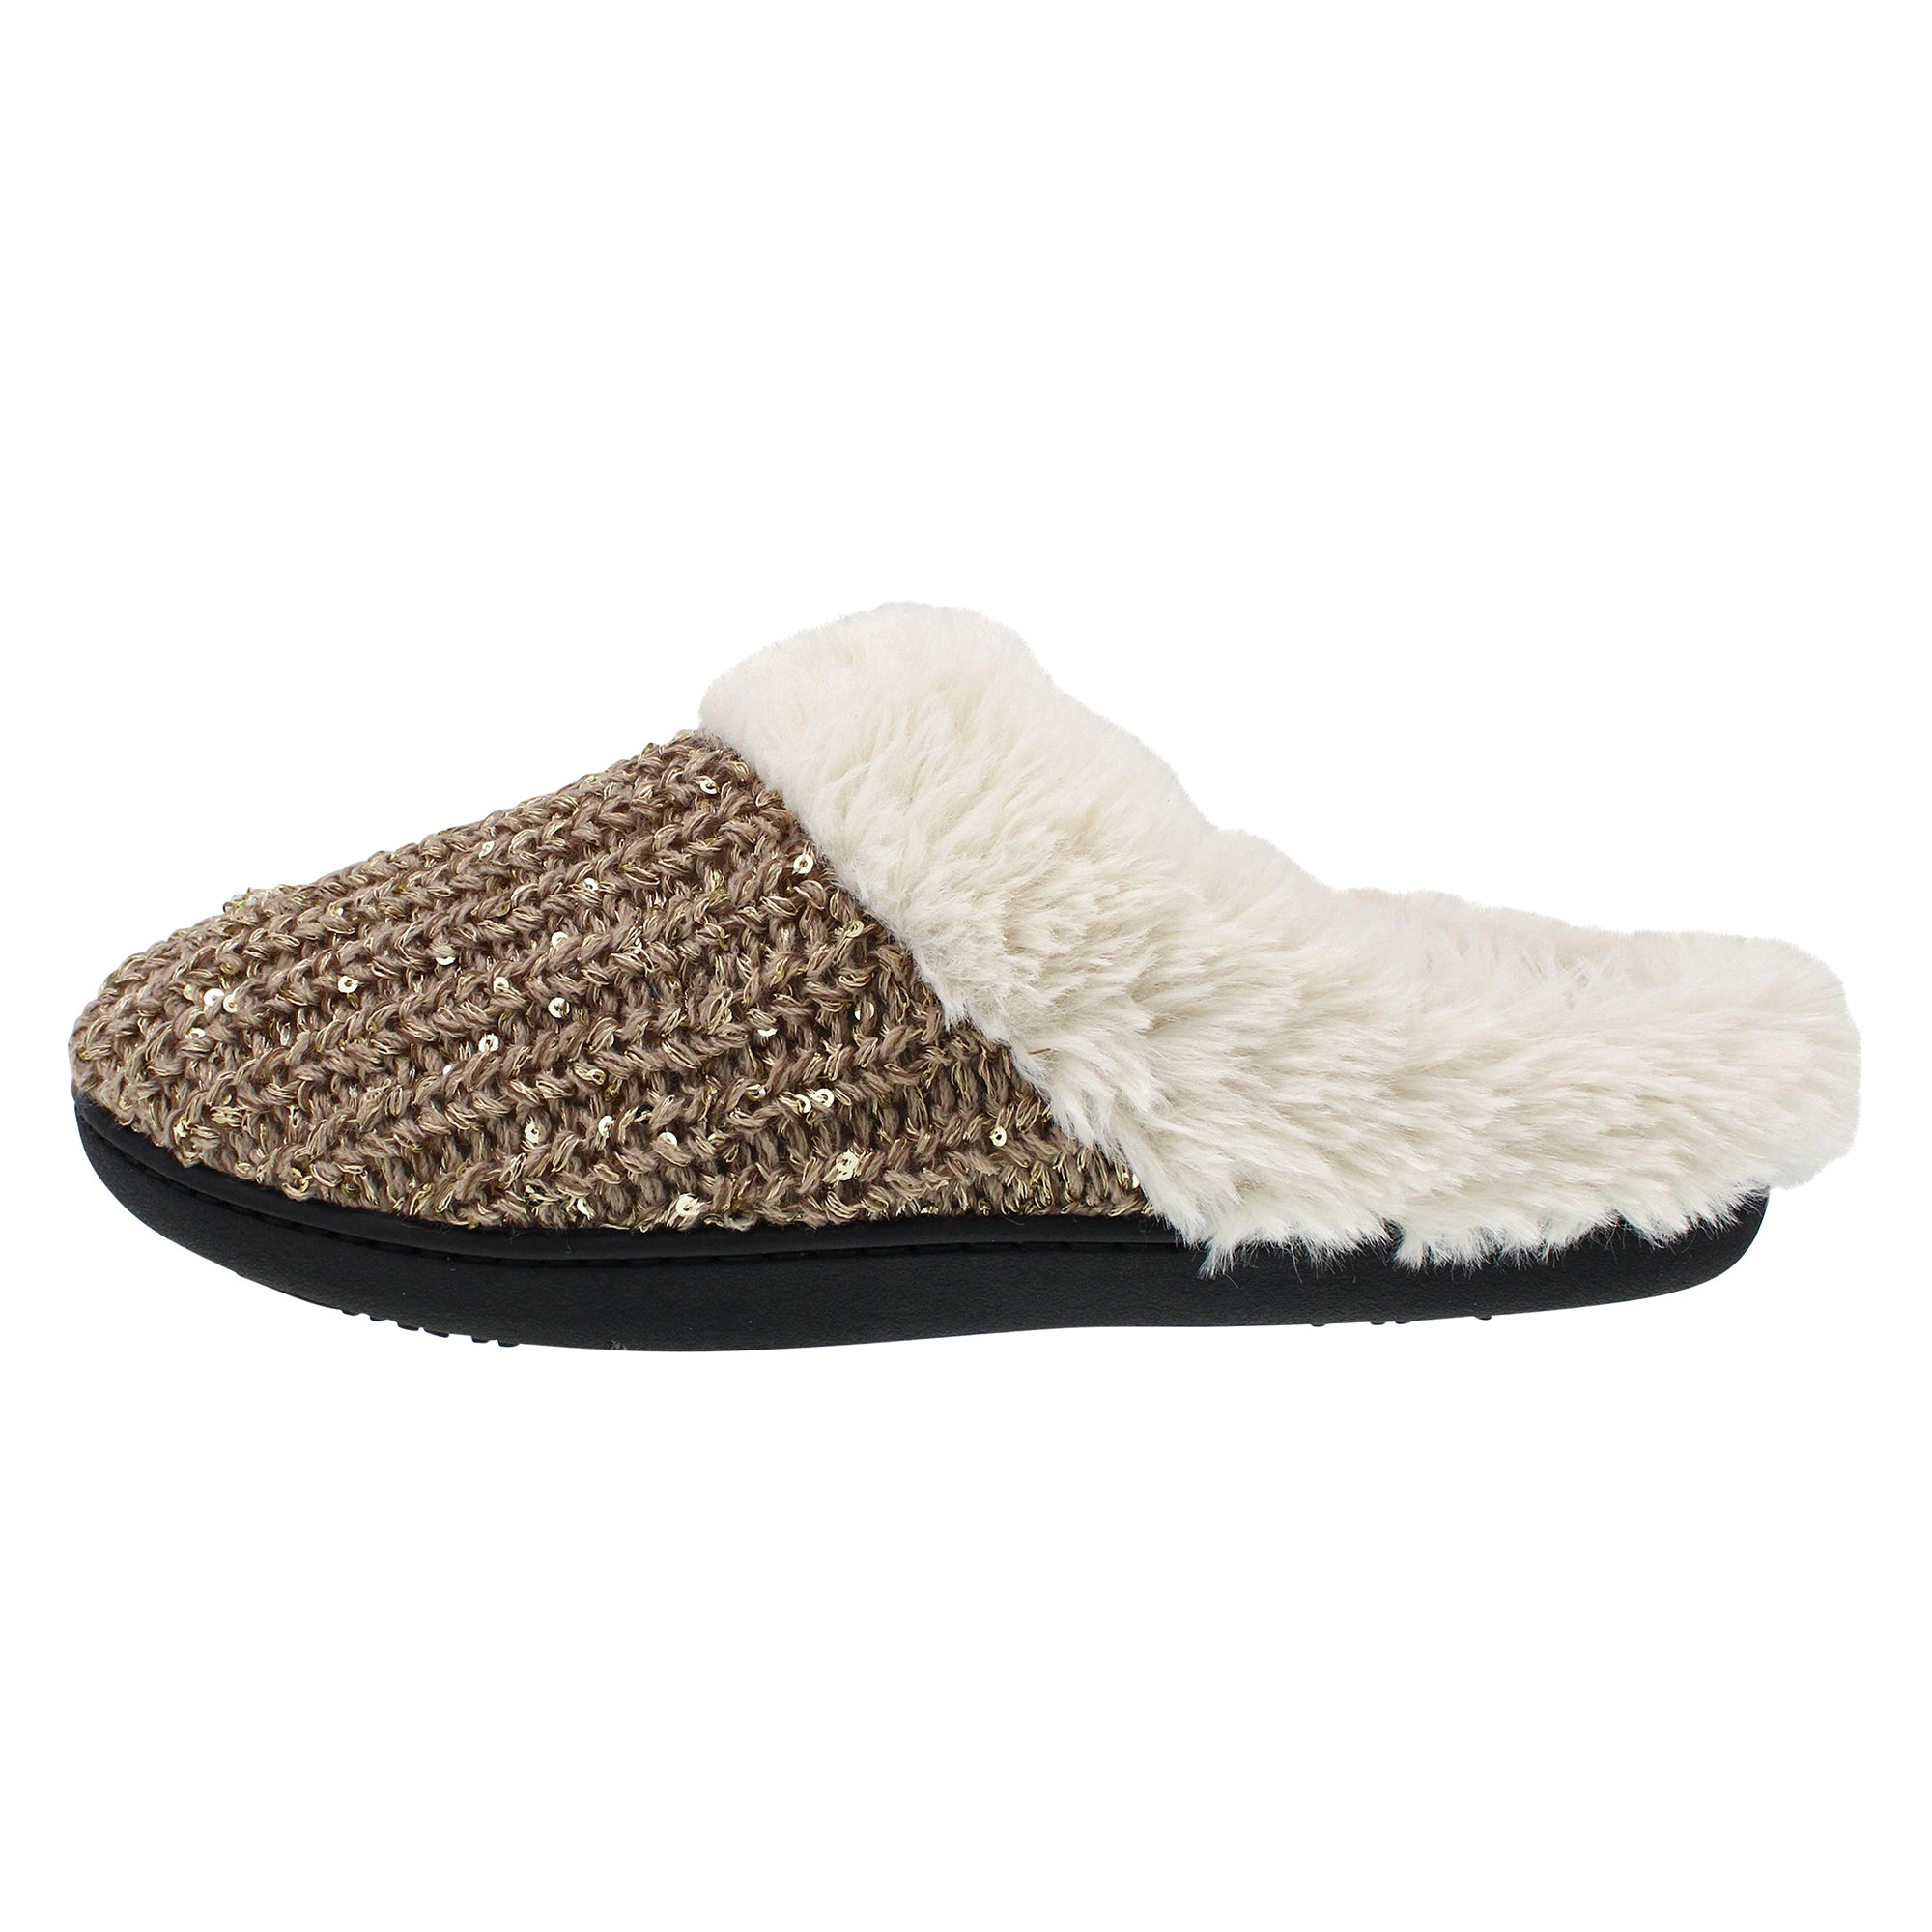 Update more than 229 women’s sequin slippers latest